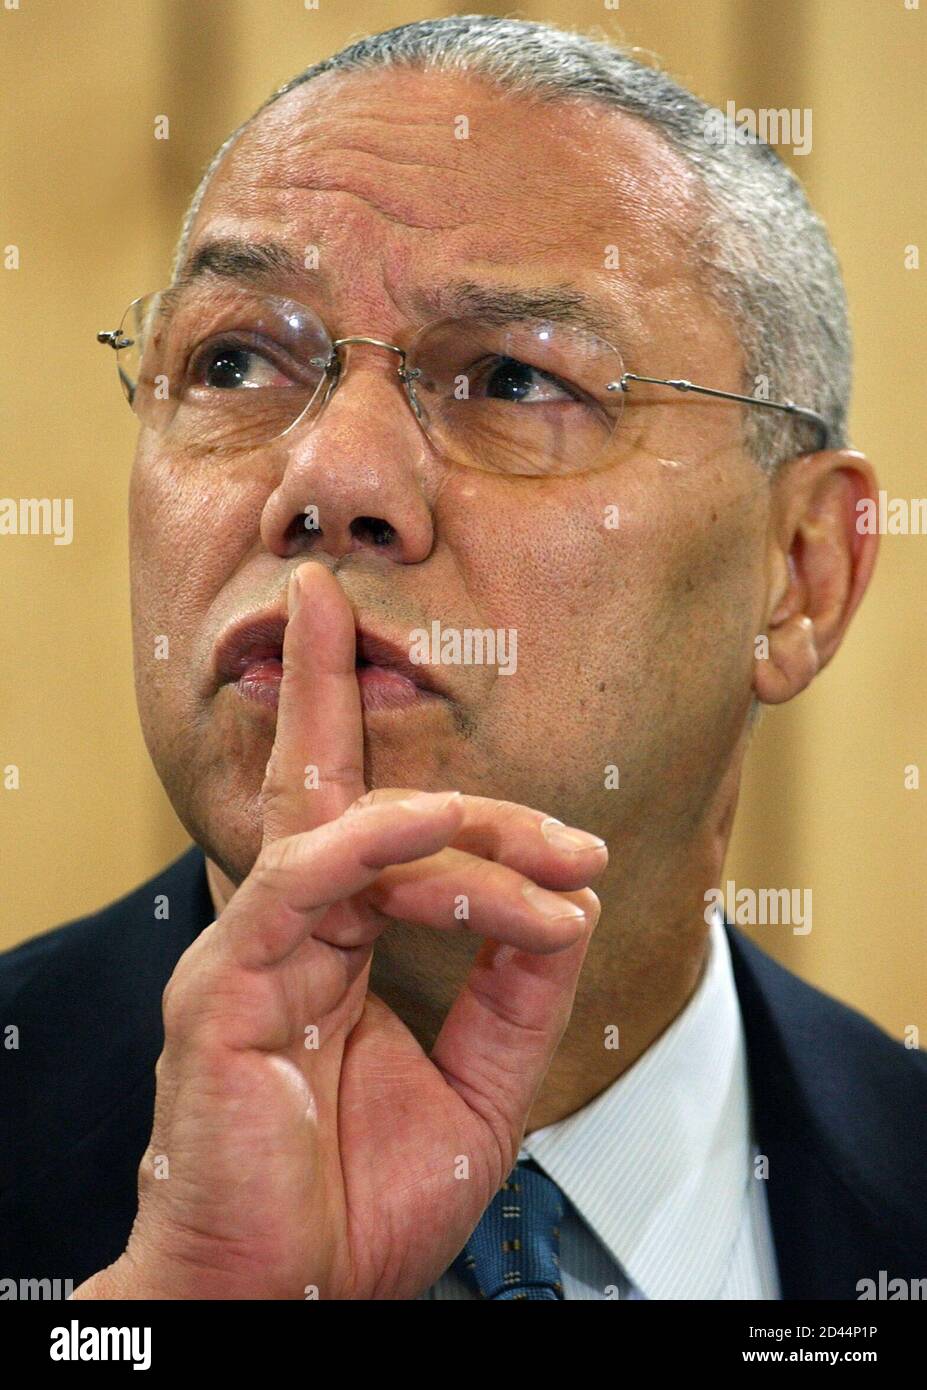 U.S. Secretary of State Colin Powell gestures during a discussion with pupils at the Max-Planck high school in Berlin April 1, 2004. Powell is attending a conference of international donors for Afghanistan in Berlin. REUTERS/Stephanie Pilick/Pool  AKW/JV Stock Photo